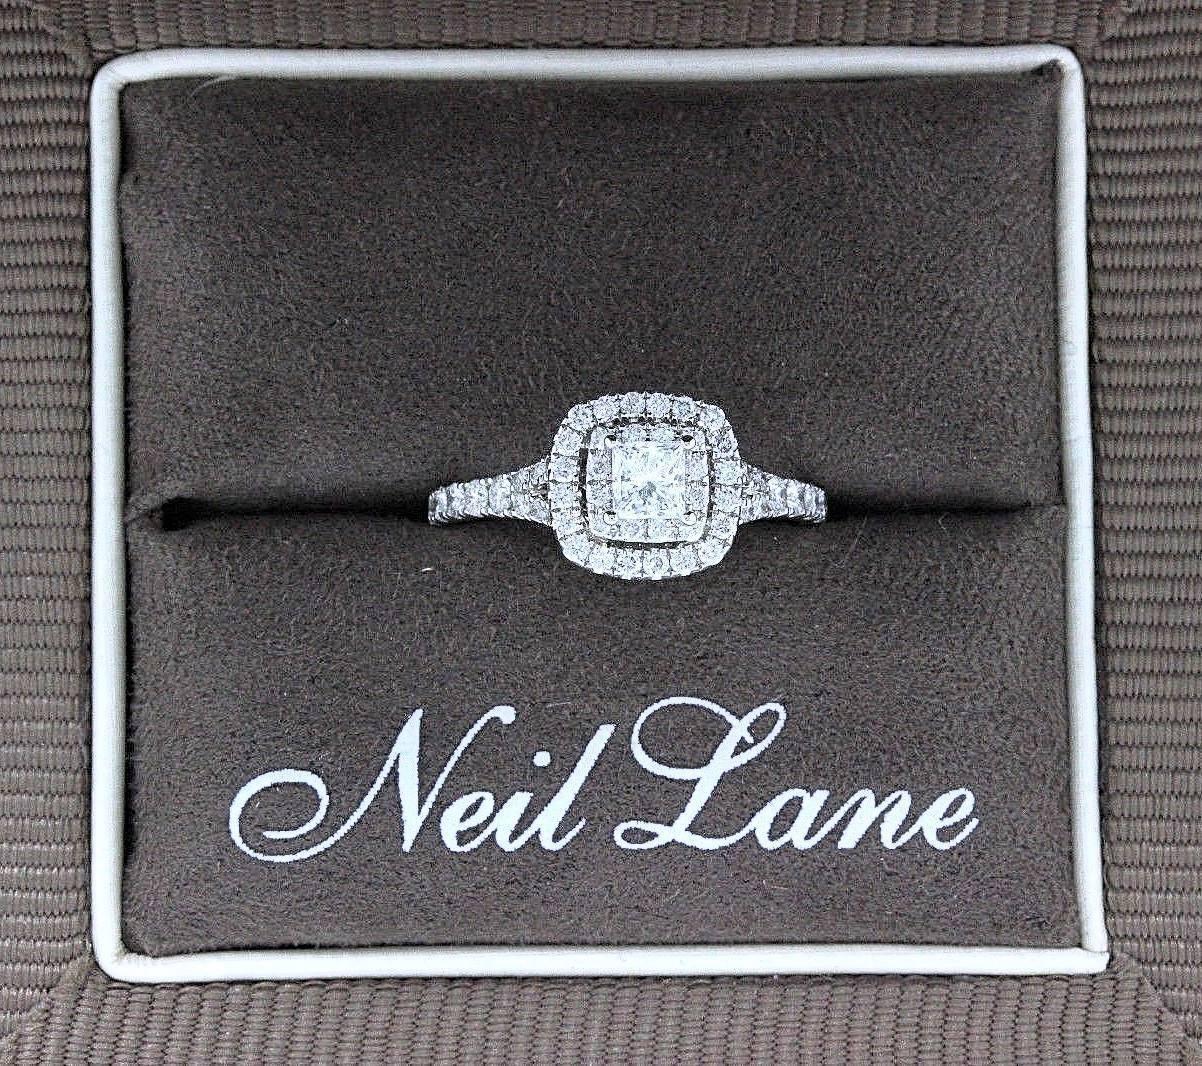 NEIL LANE BRIDAL COLLECTION
Style:  Double Halo Pave Diamond Engagement Ring
Item Number:  940241514
Metal:  14k White Gold
Size:  6.5 - Sizable
Total Carat Weight:  1.00 TCW
Center Diamond Shape:  Round Diamond 0.33 CTS
Diamond Color & Clarity:  I